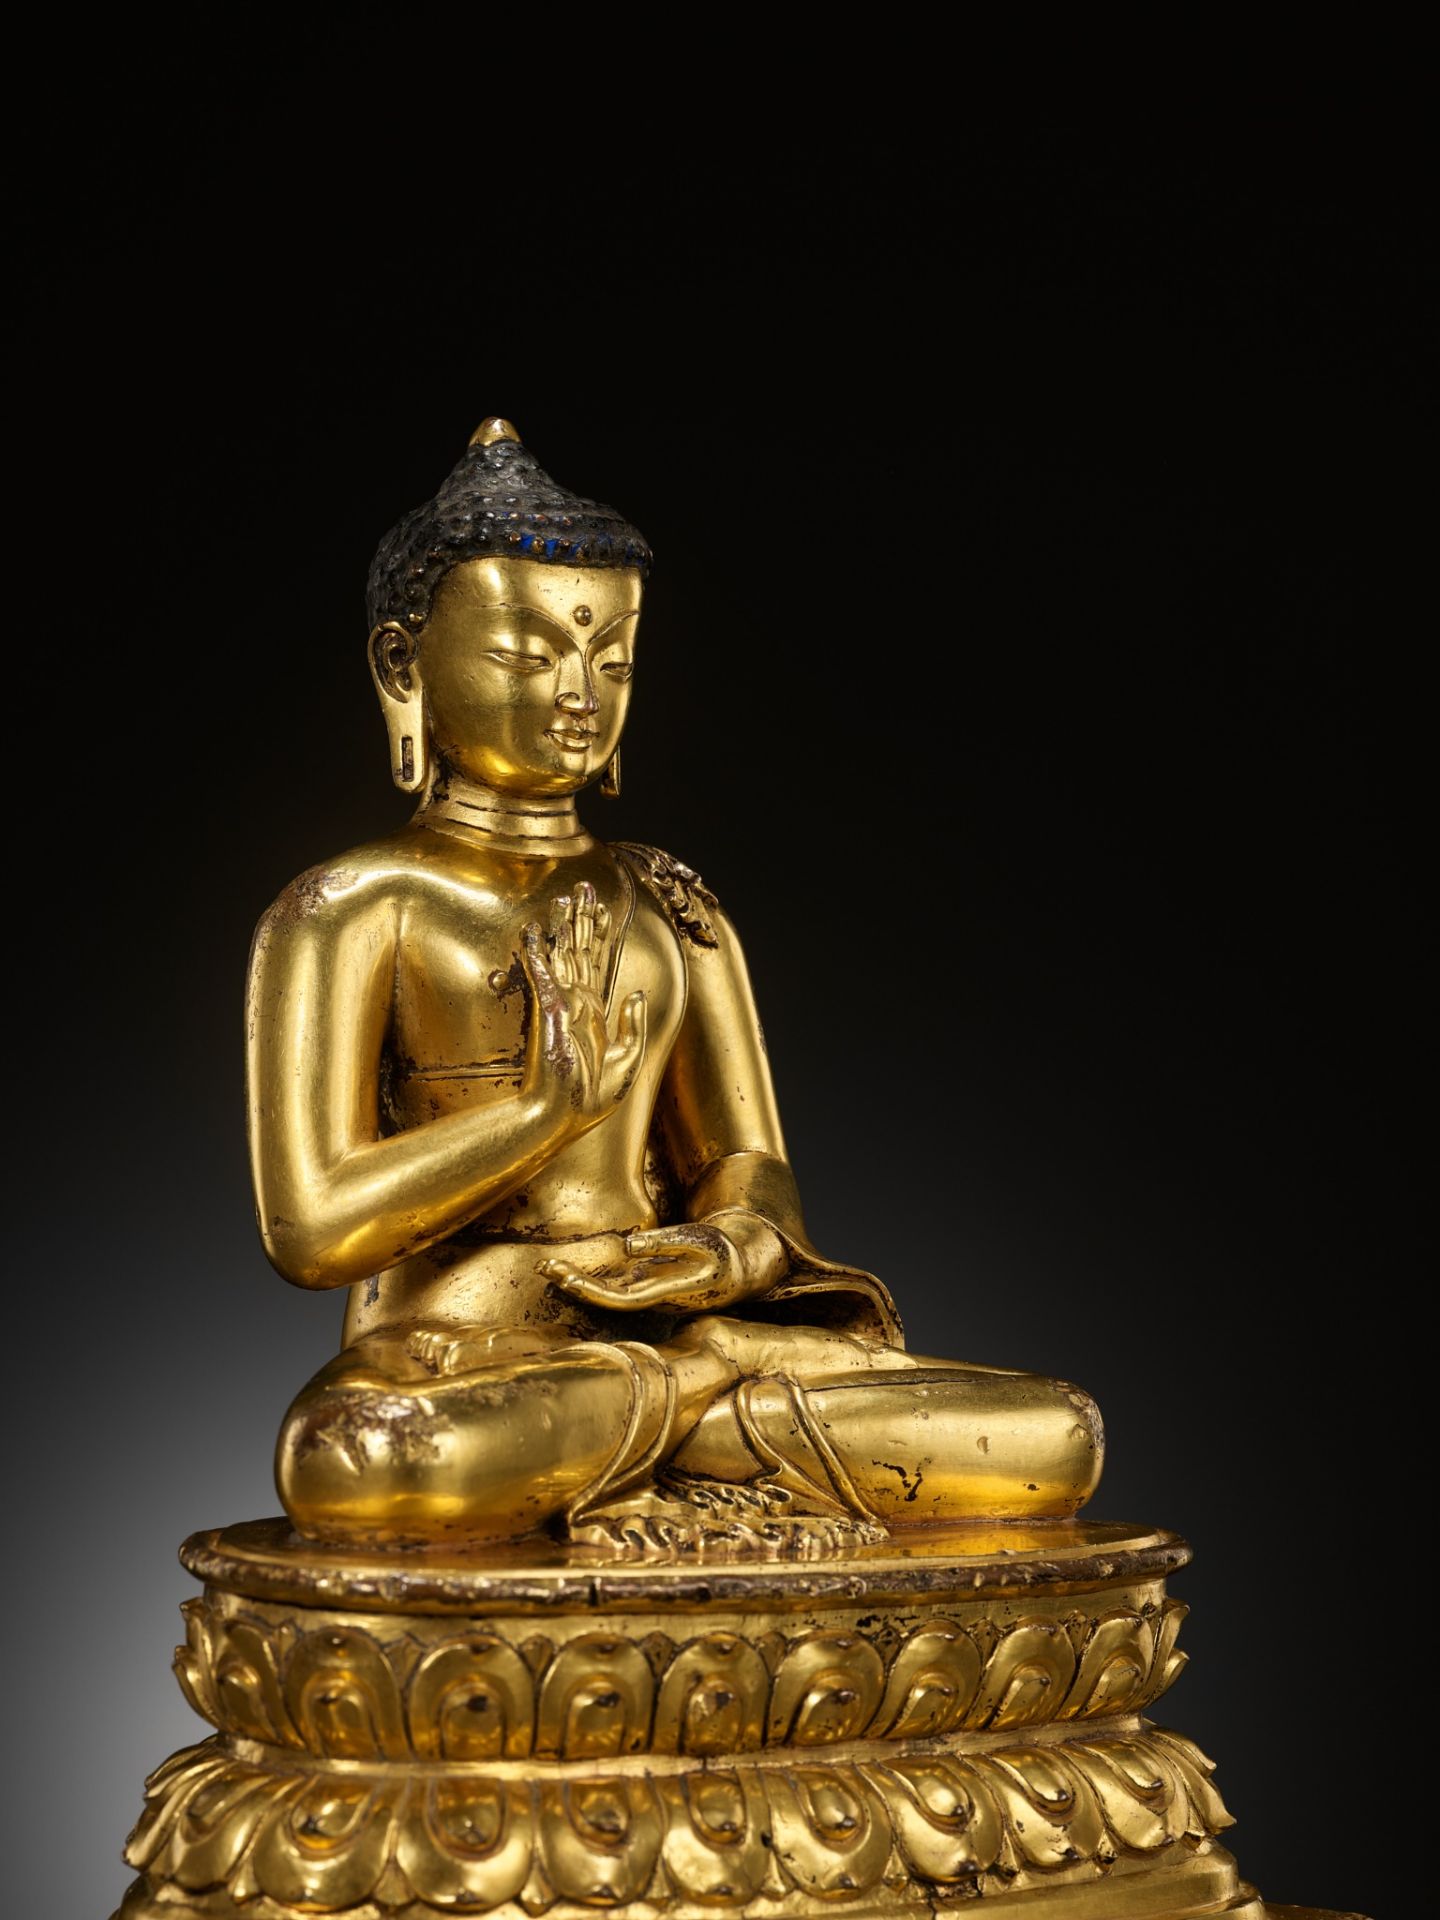 A GILT COPPER ALLOY FIGURE OF AMOGHASIDDHI, POSSIBLY DENSATIL, TIBET, 14TH-15TH CENTURY - Image 20 of 22